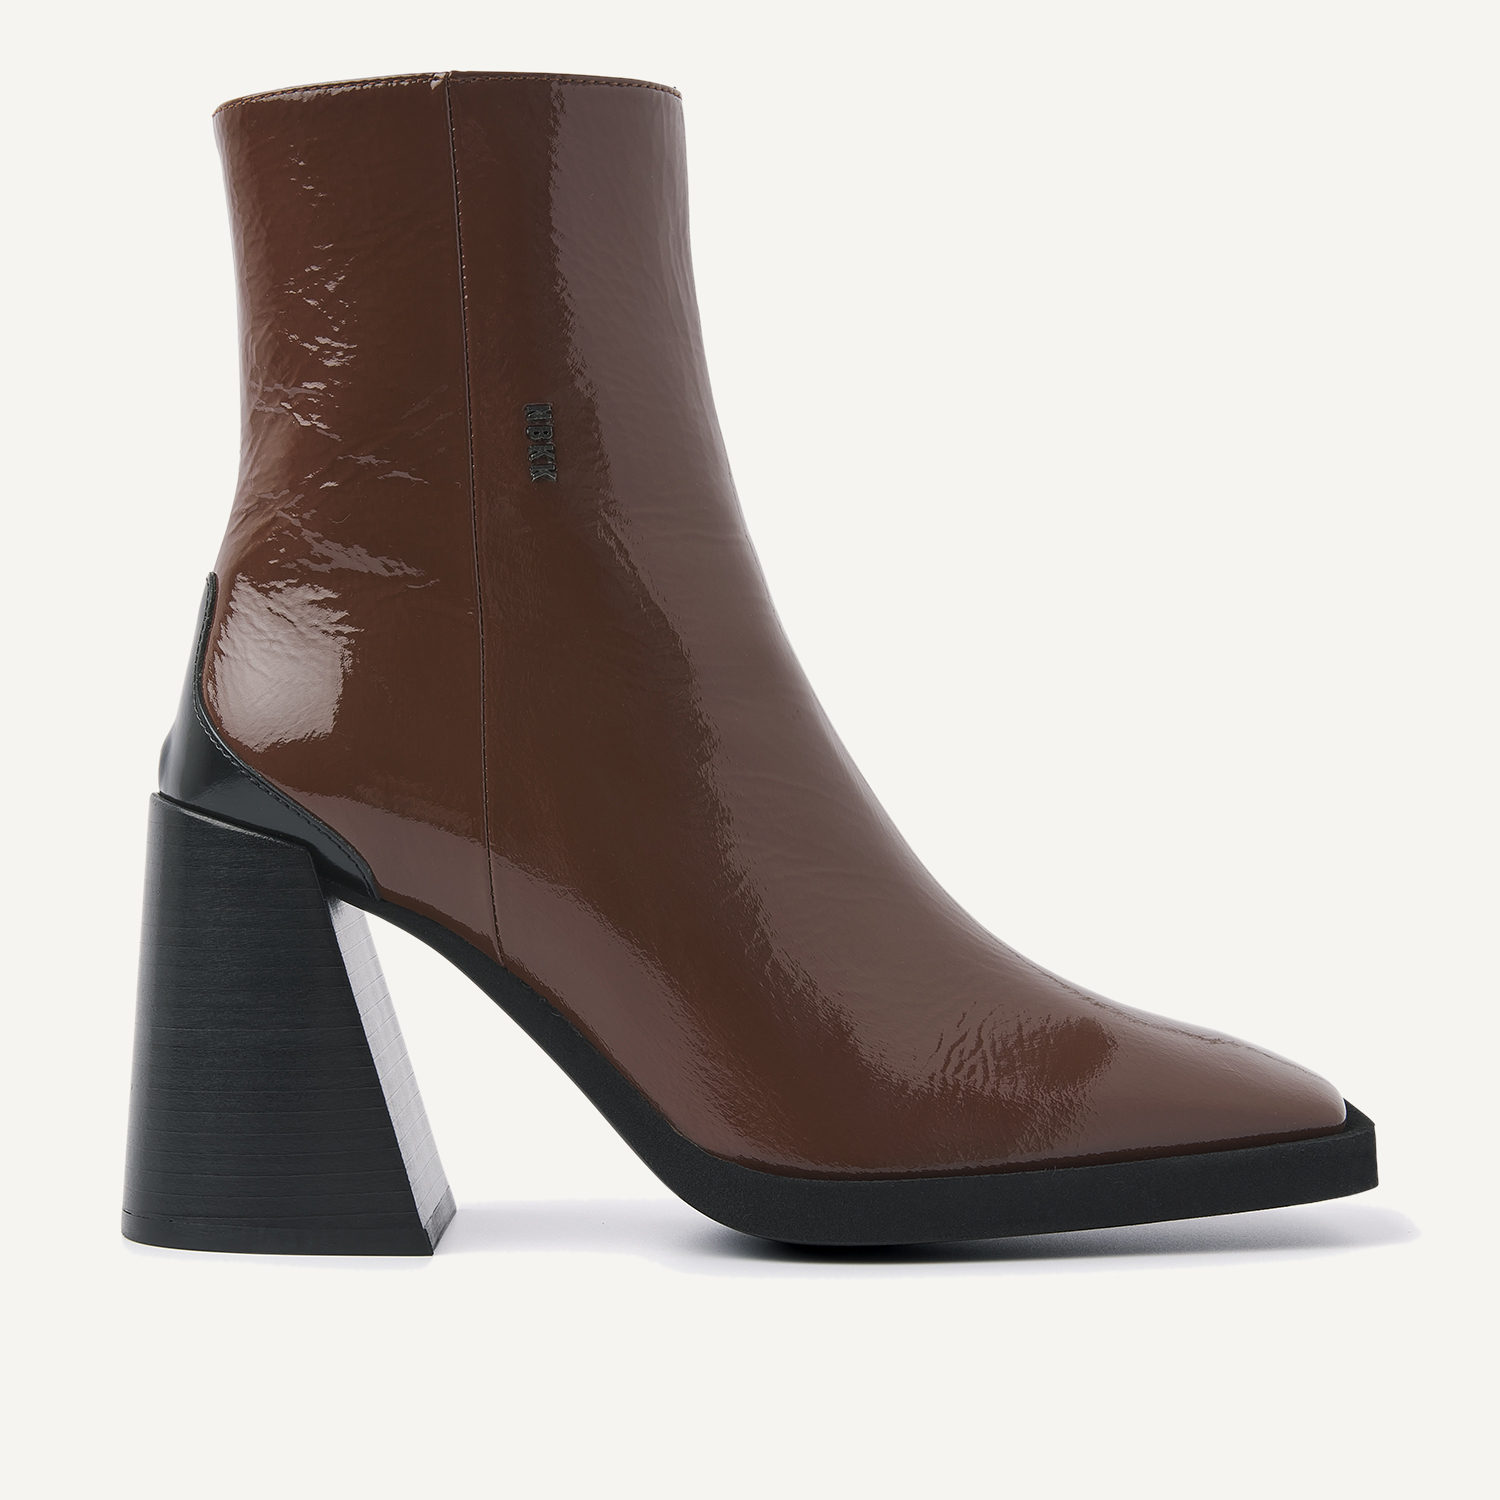 Lana Pilar II | Brown Patent Ankle Boots for Women